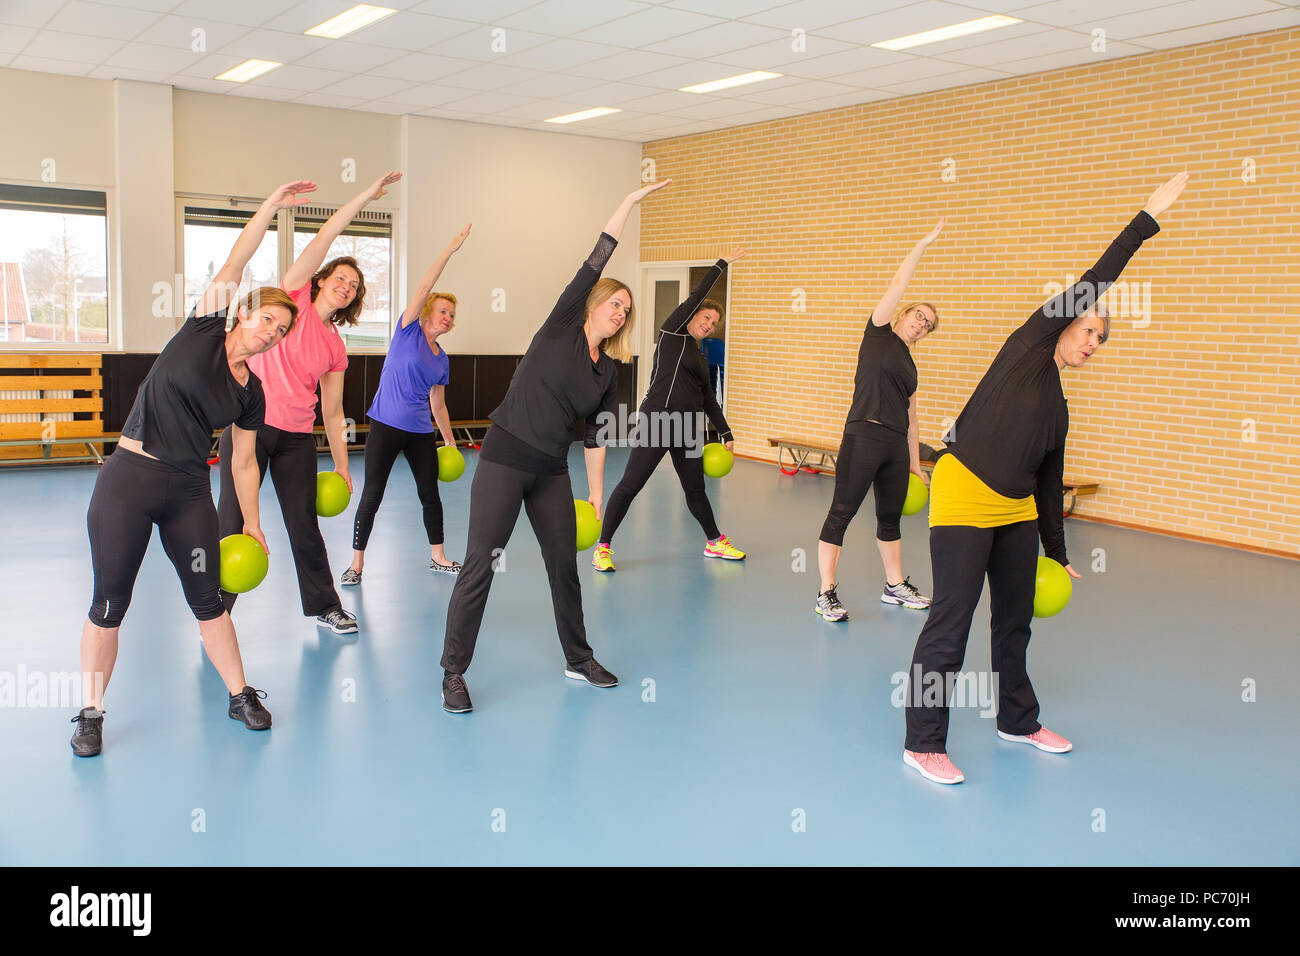 Group of women with balls doing stretching exercises in gym class Stock Photo